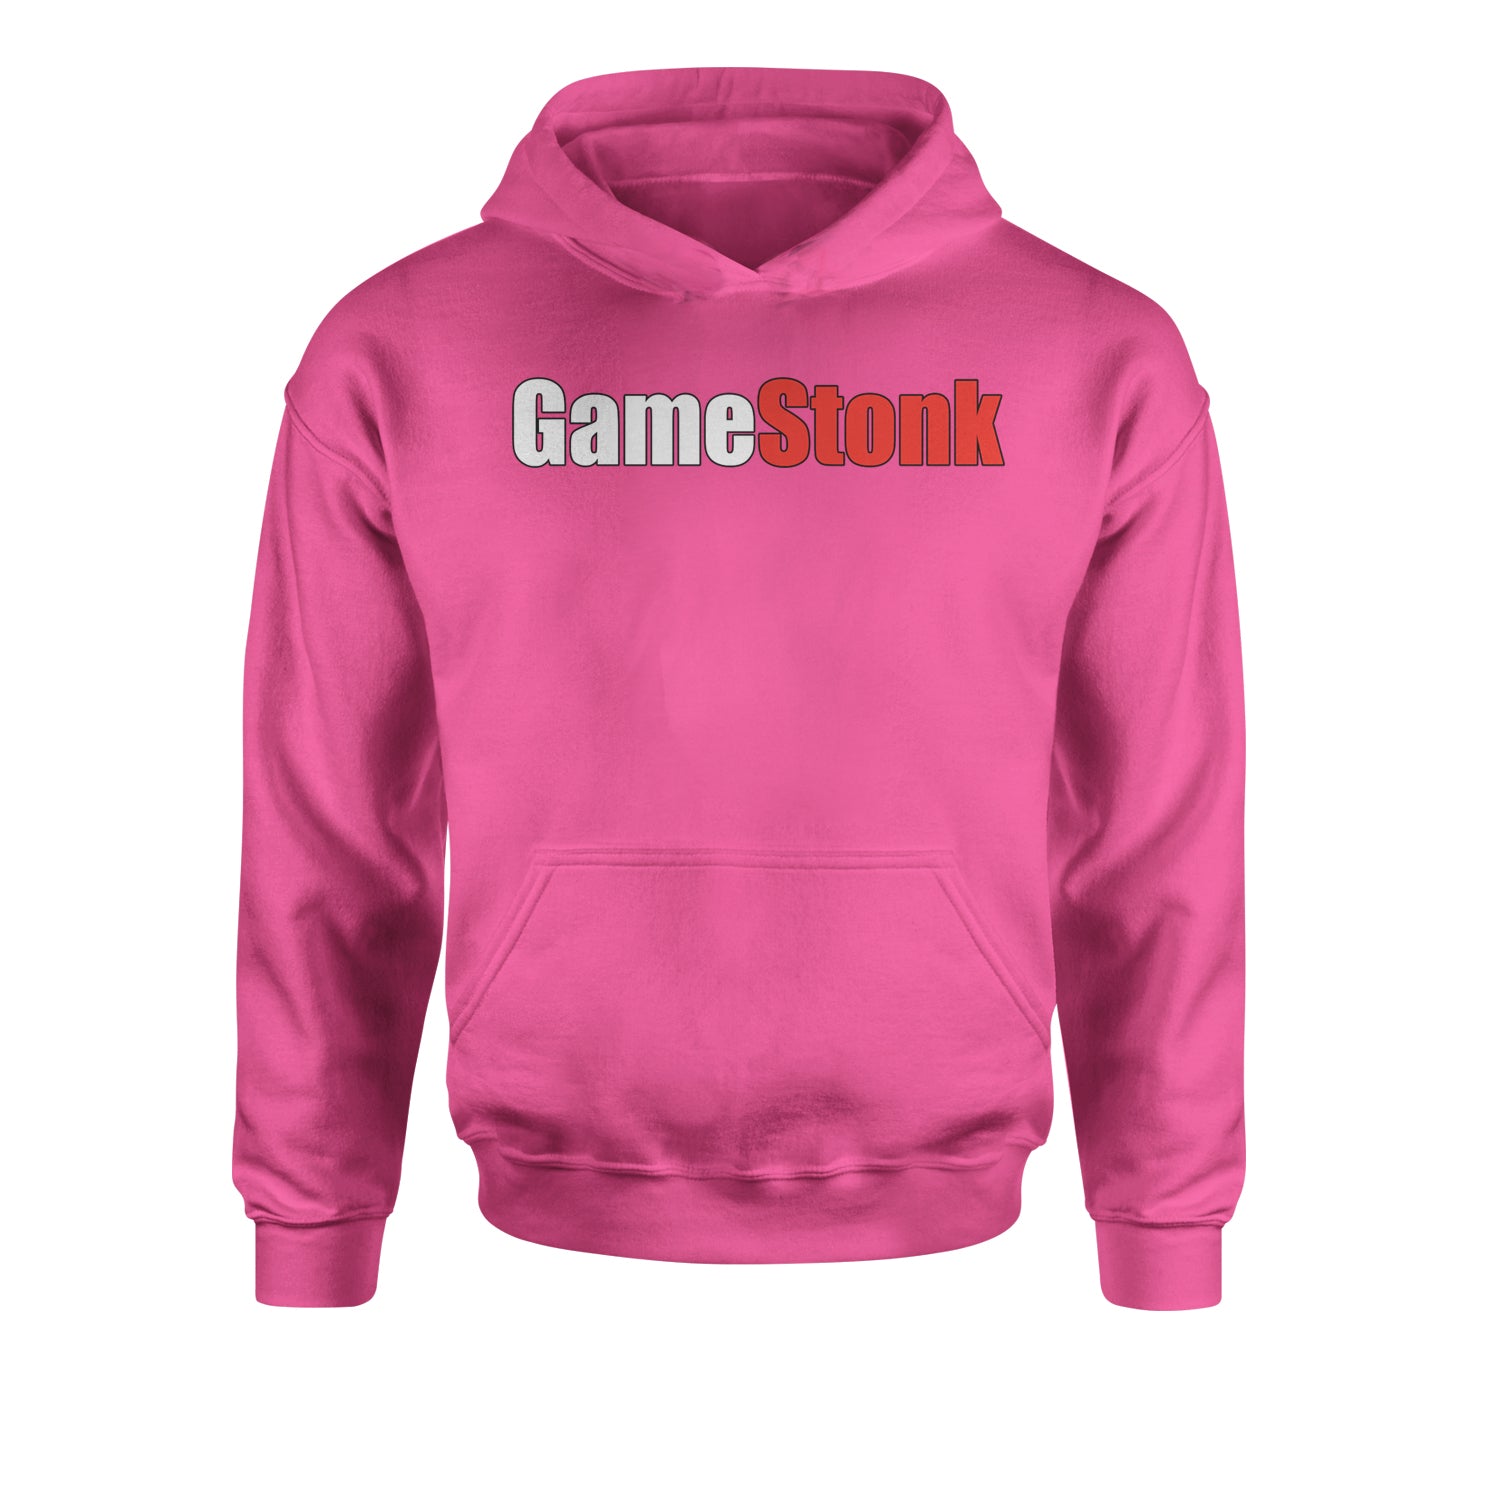 GameStonk - GME To The Moon Youth-Sized Hoodie elon, game, gamestop, GME, hood, investment, musk, robin, robinhood, stop by Expression Tees